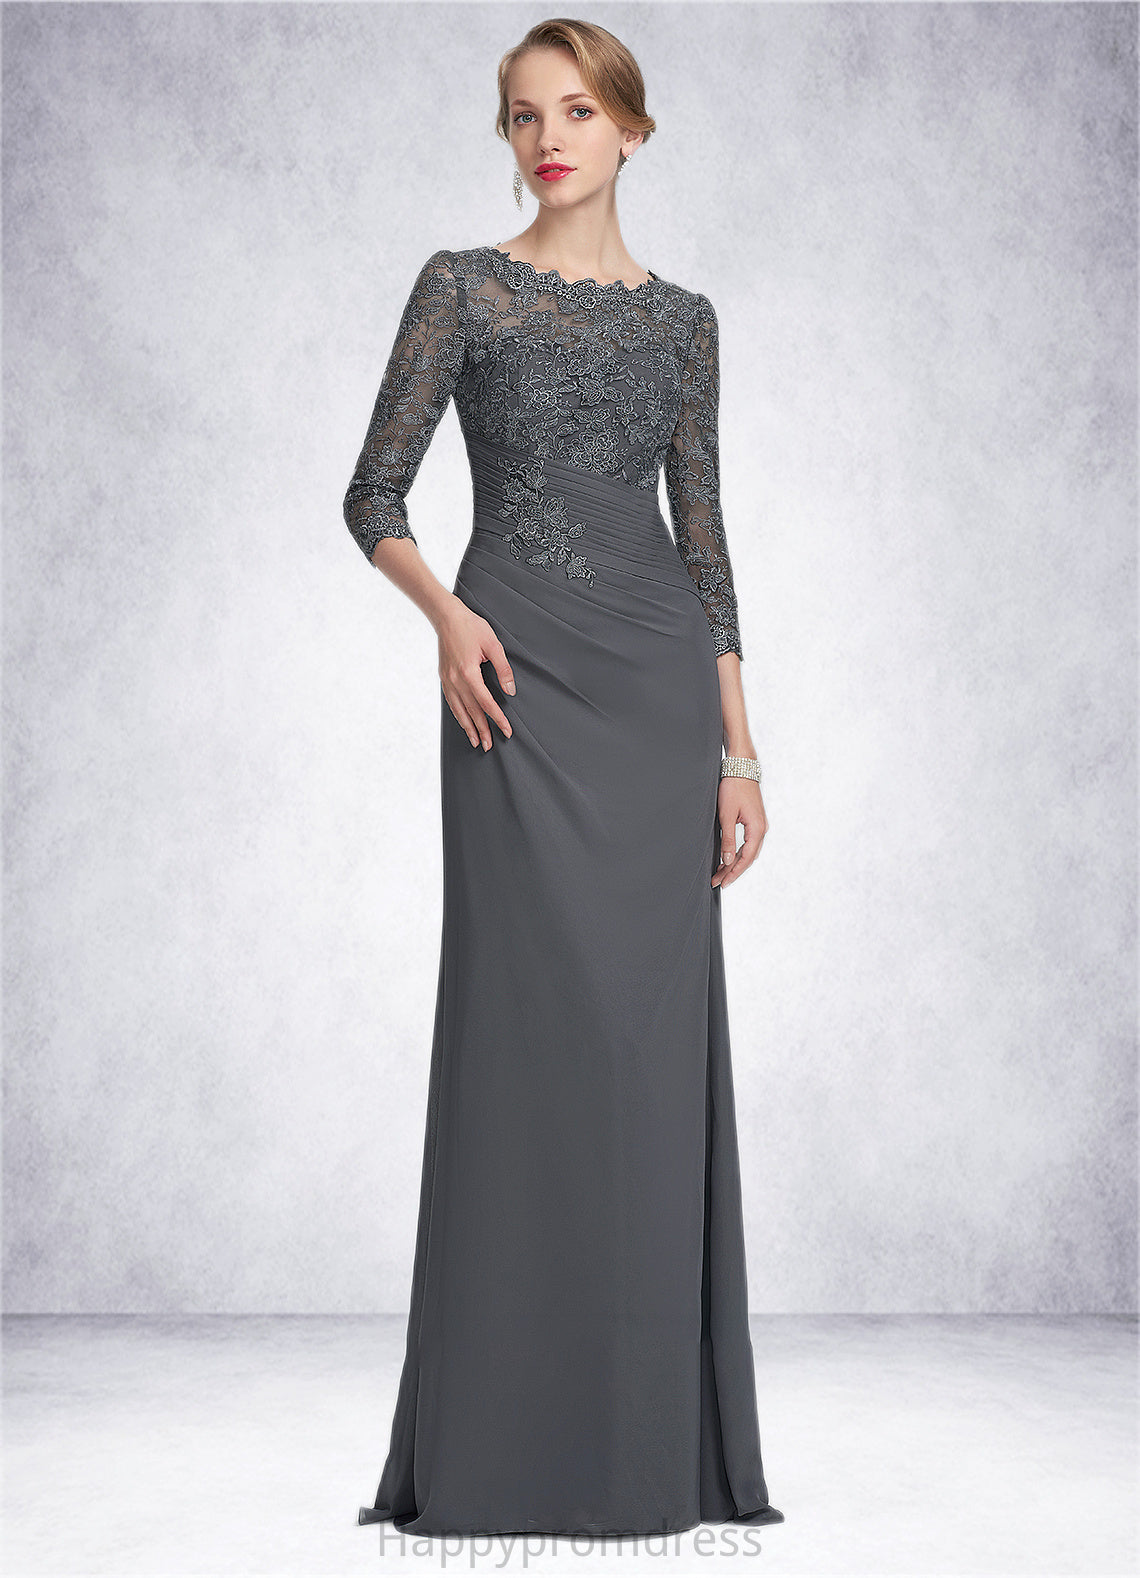 Stella Sheath/Column Scoop Neck Floor-Length Chiffon Lace Mother of the Bride Dress With Ruffle XXS126P0014611